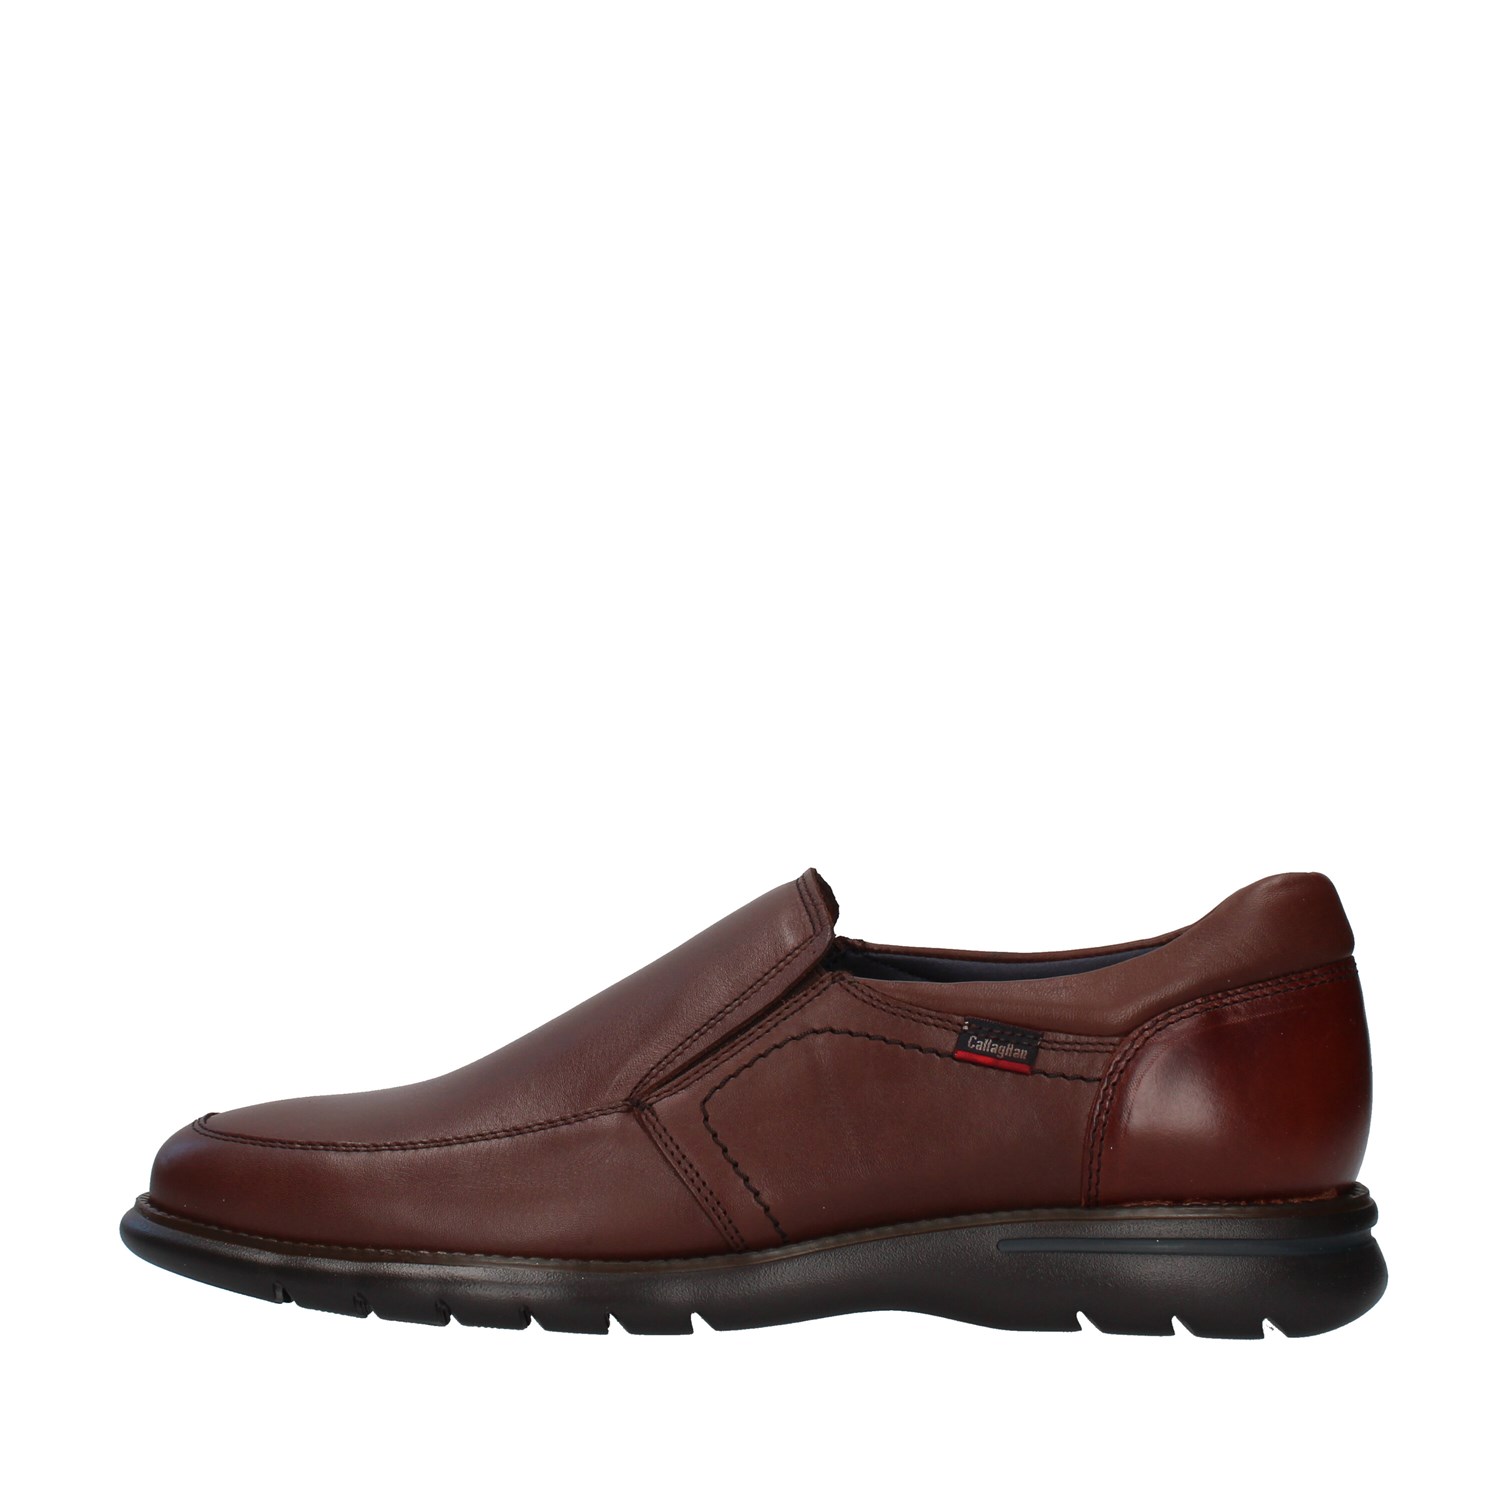 Callaghan Shoes Man Loafers BROWN 14208